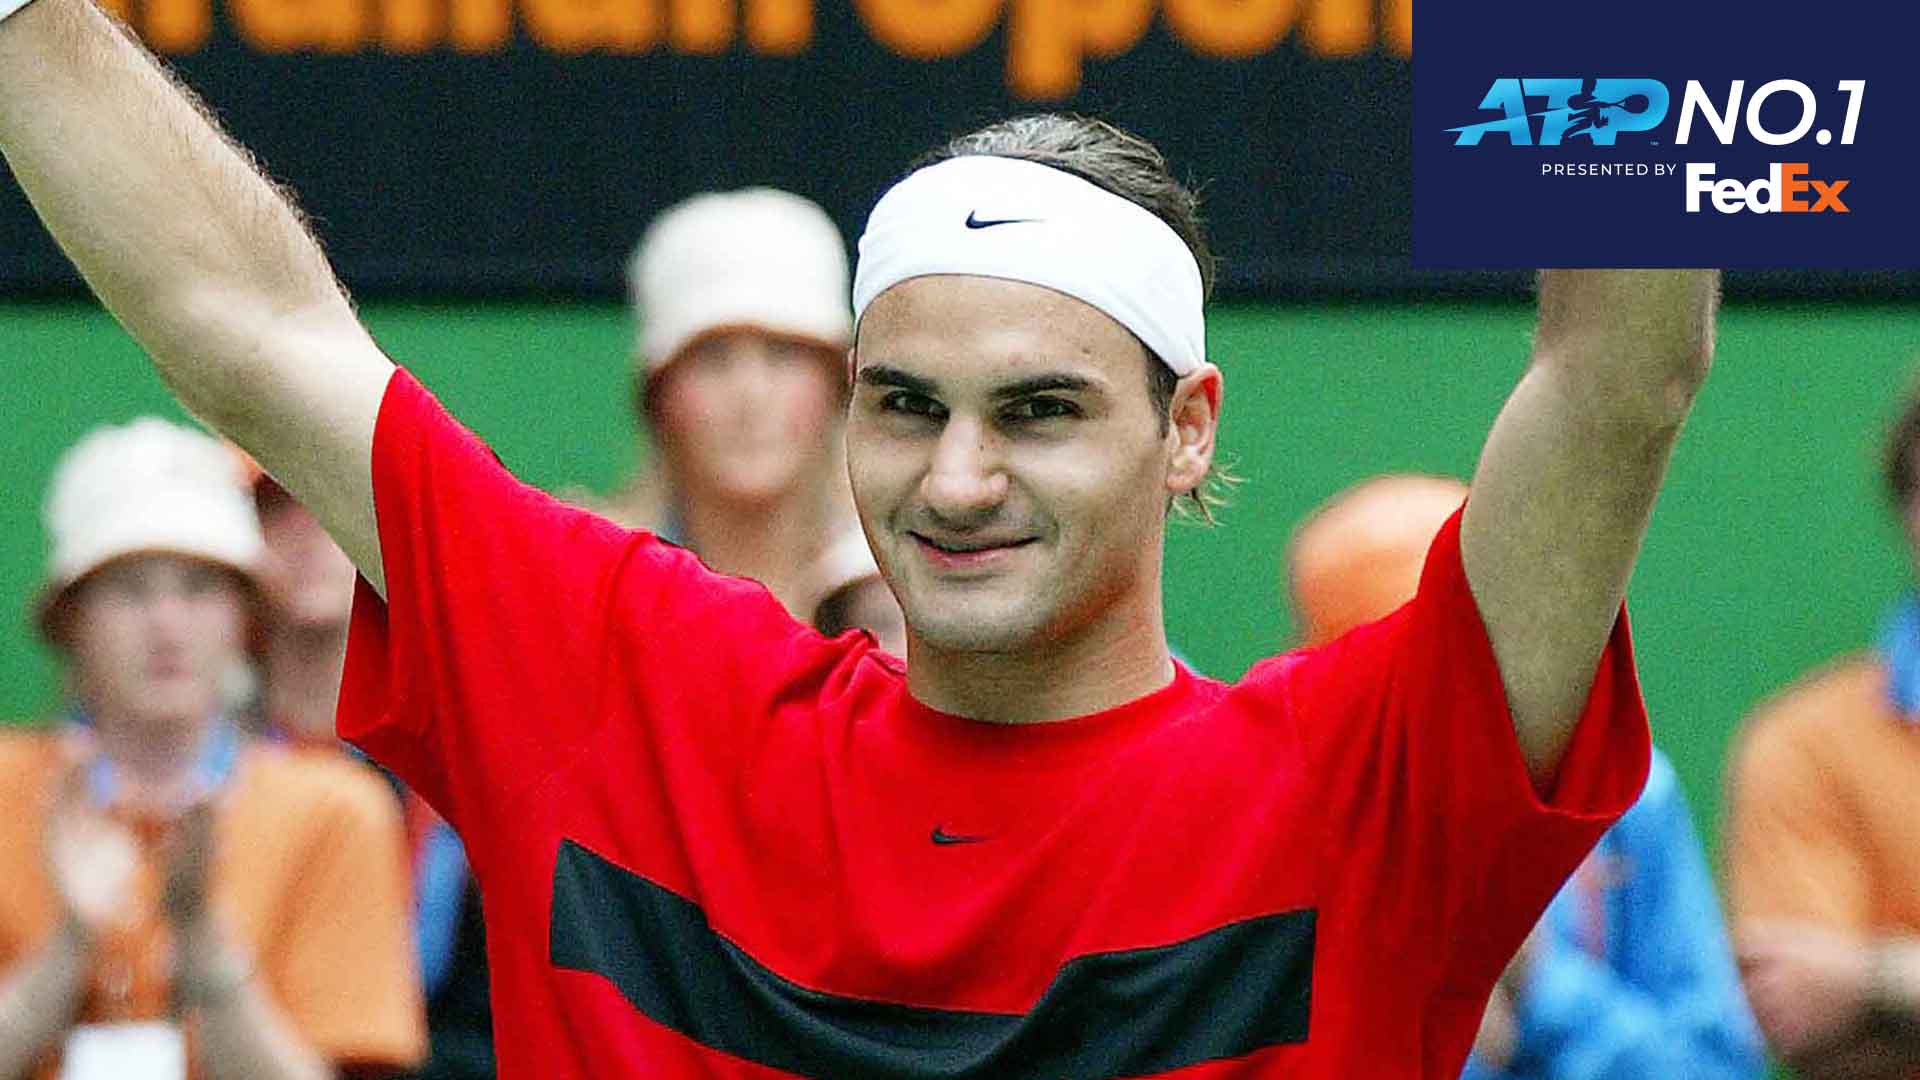 Roger Federer rose to World No. 1 in the FedEx ATP Rankings for the first time after winning his maiden Australian Open trophy in 2004.